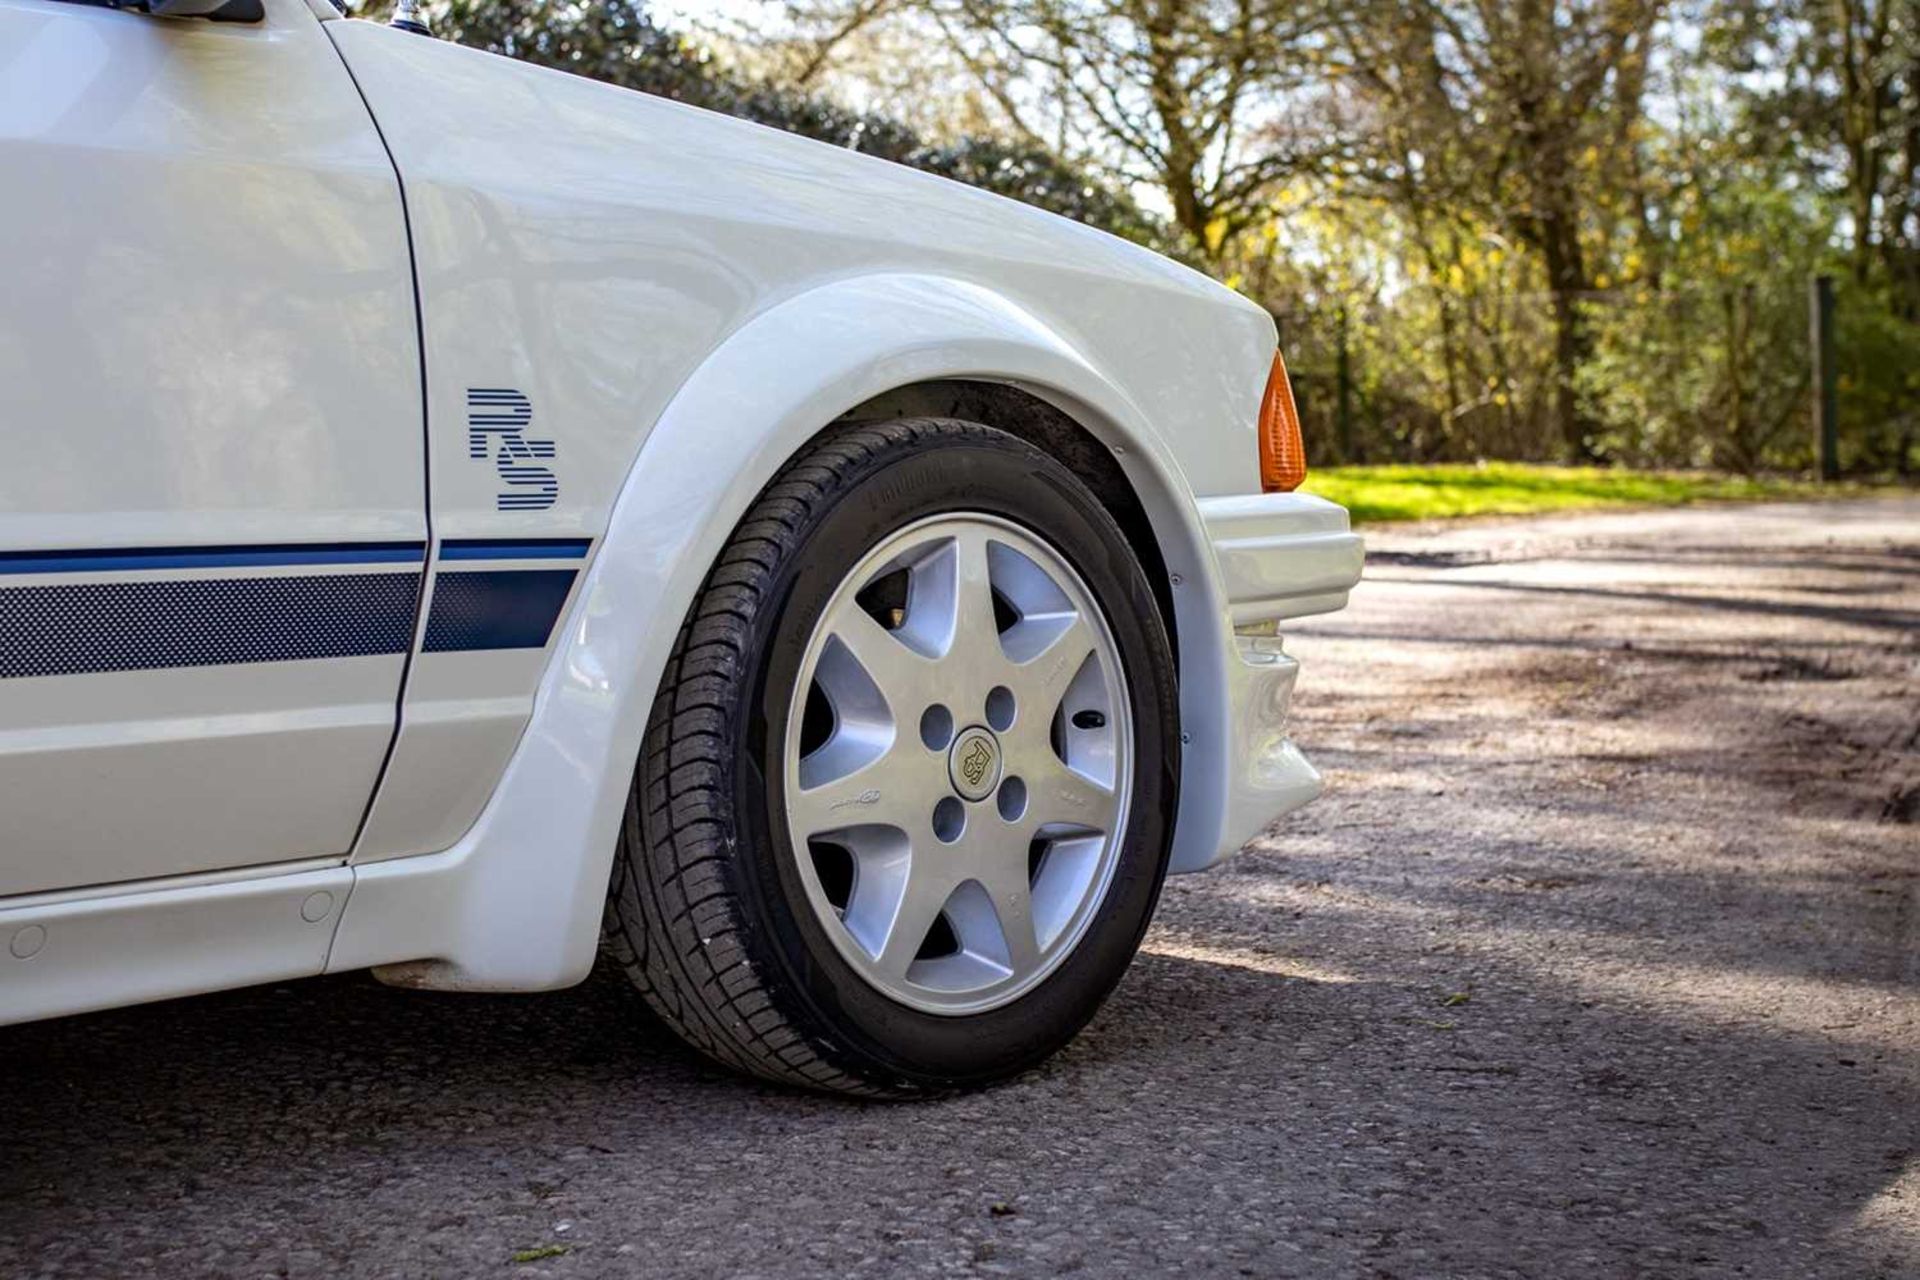 1985 Ford Escort RS Turbo S1 Subject to a full restoration  - Image 39 of 76